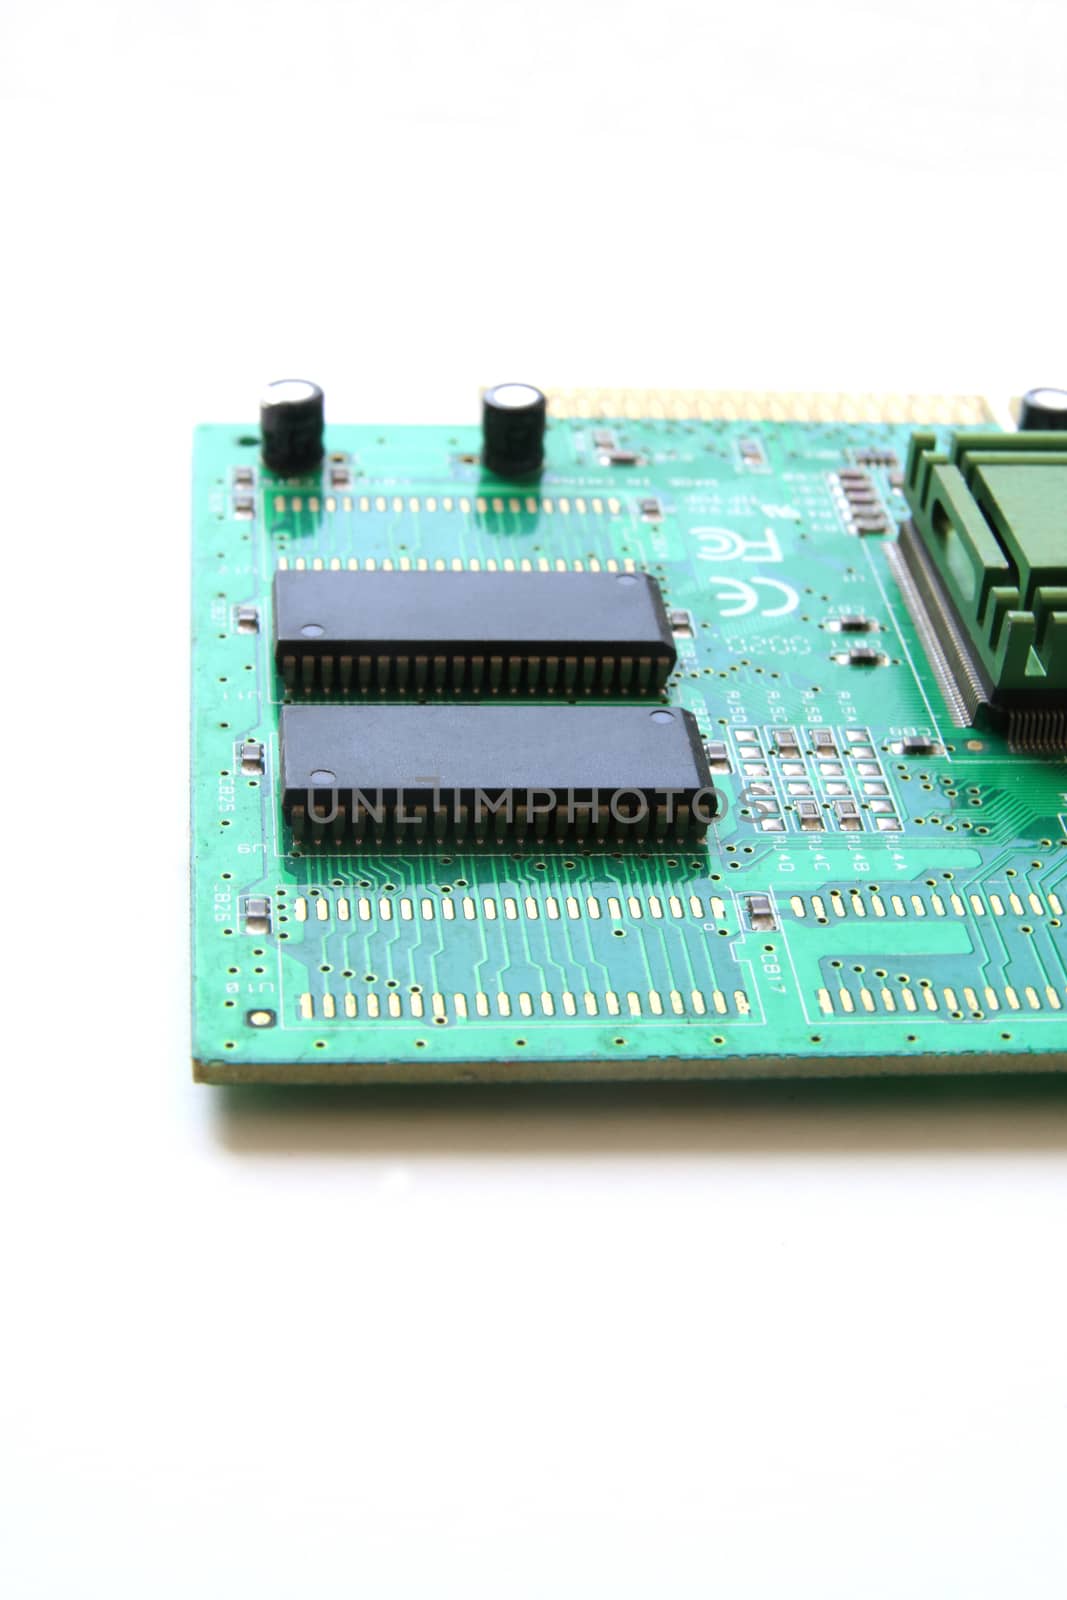 The old electronic circuit board for computer.